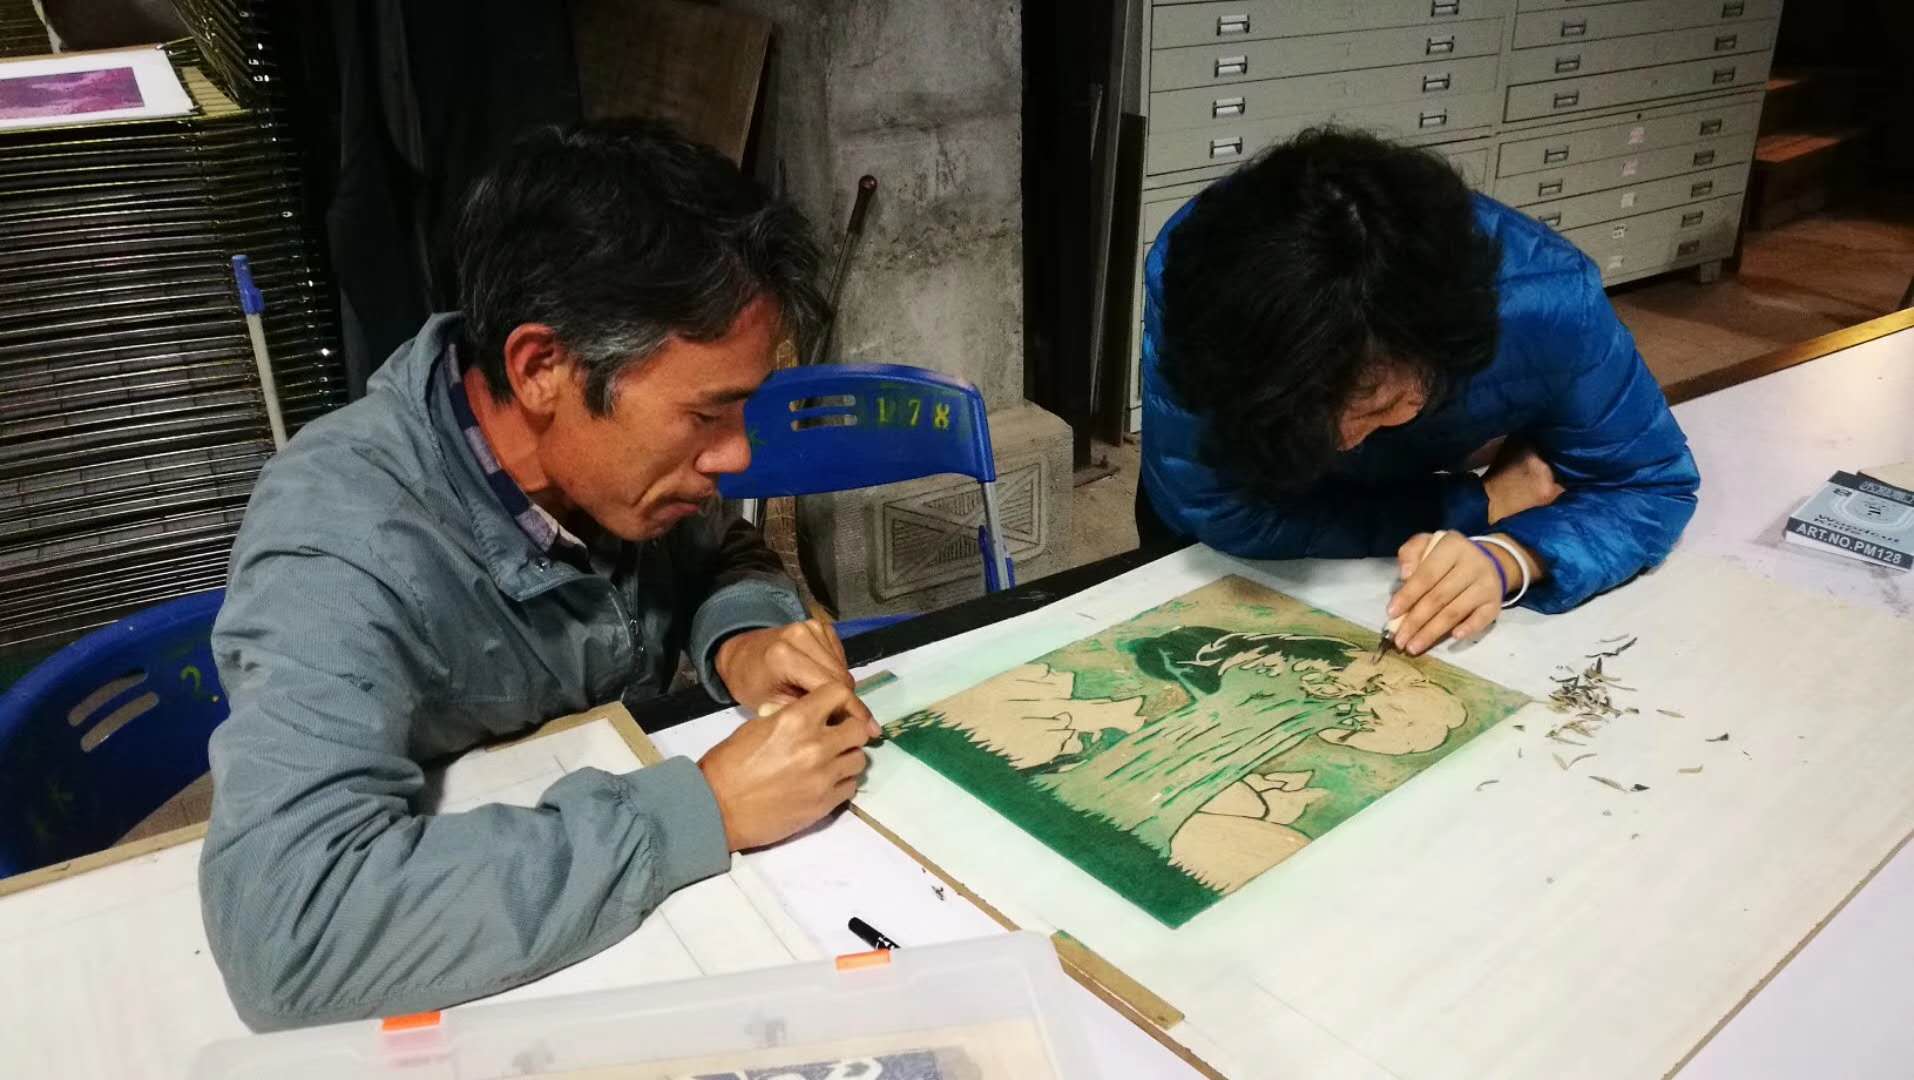 Farmer-painters carve the woodblock at the reduction woodblock print studio in Nakeli village, Pu’er, Yunnan province, in 2017